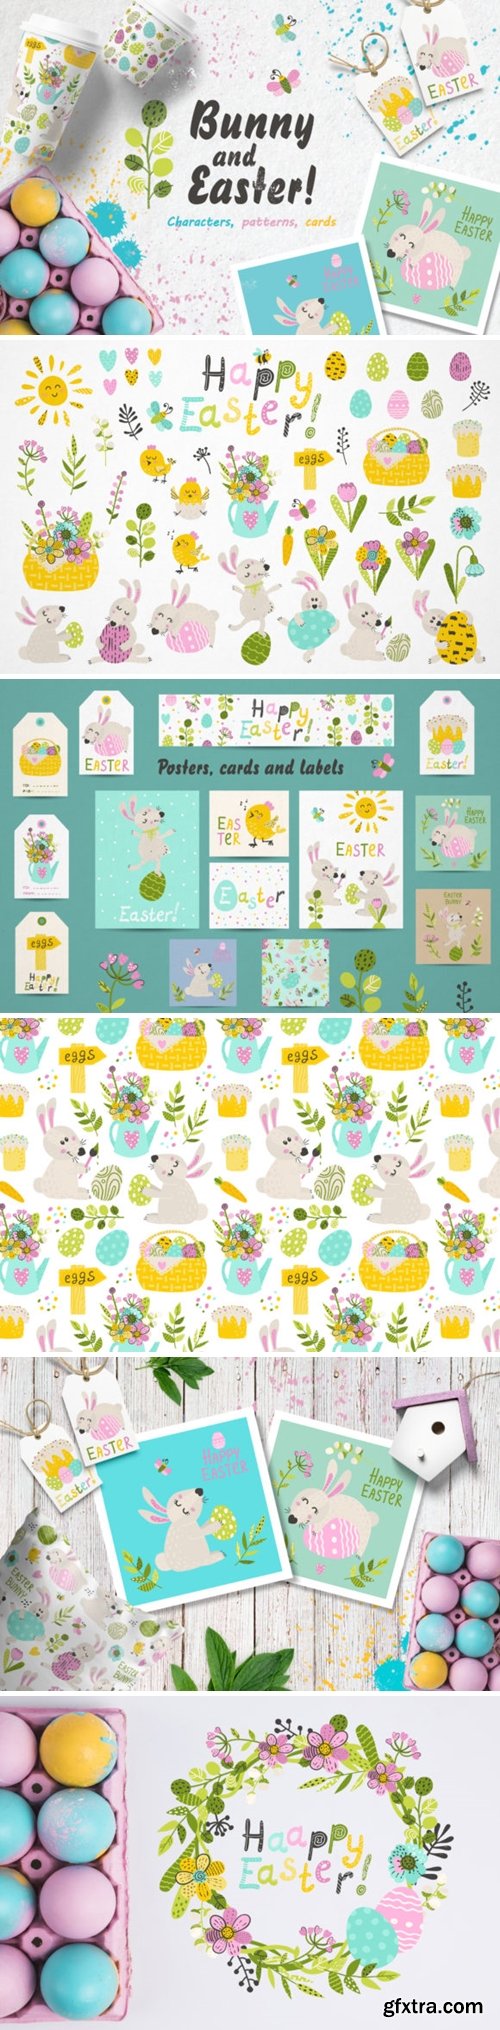 Bunny and Easter! 2196473